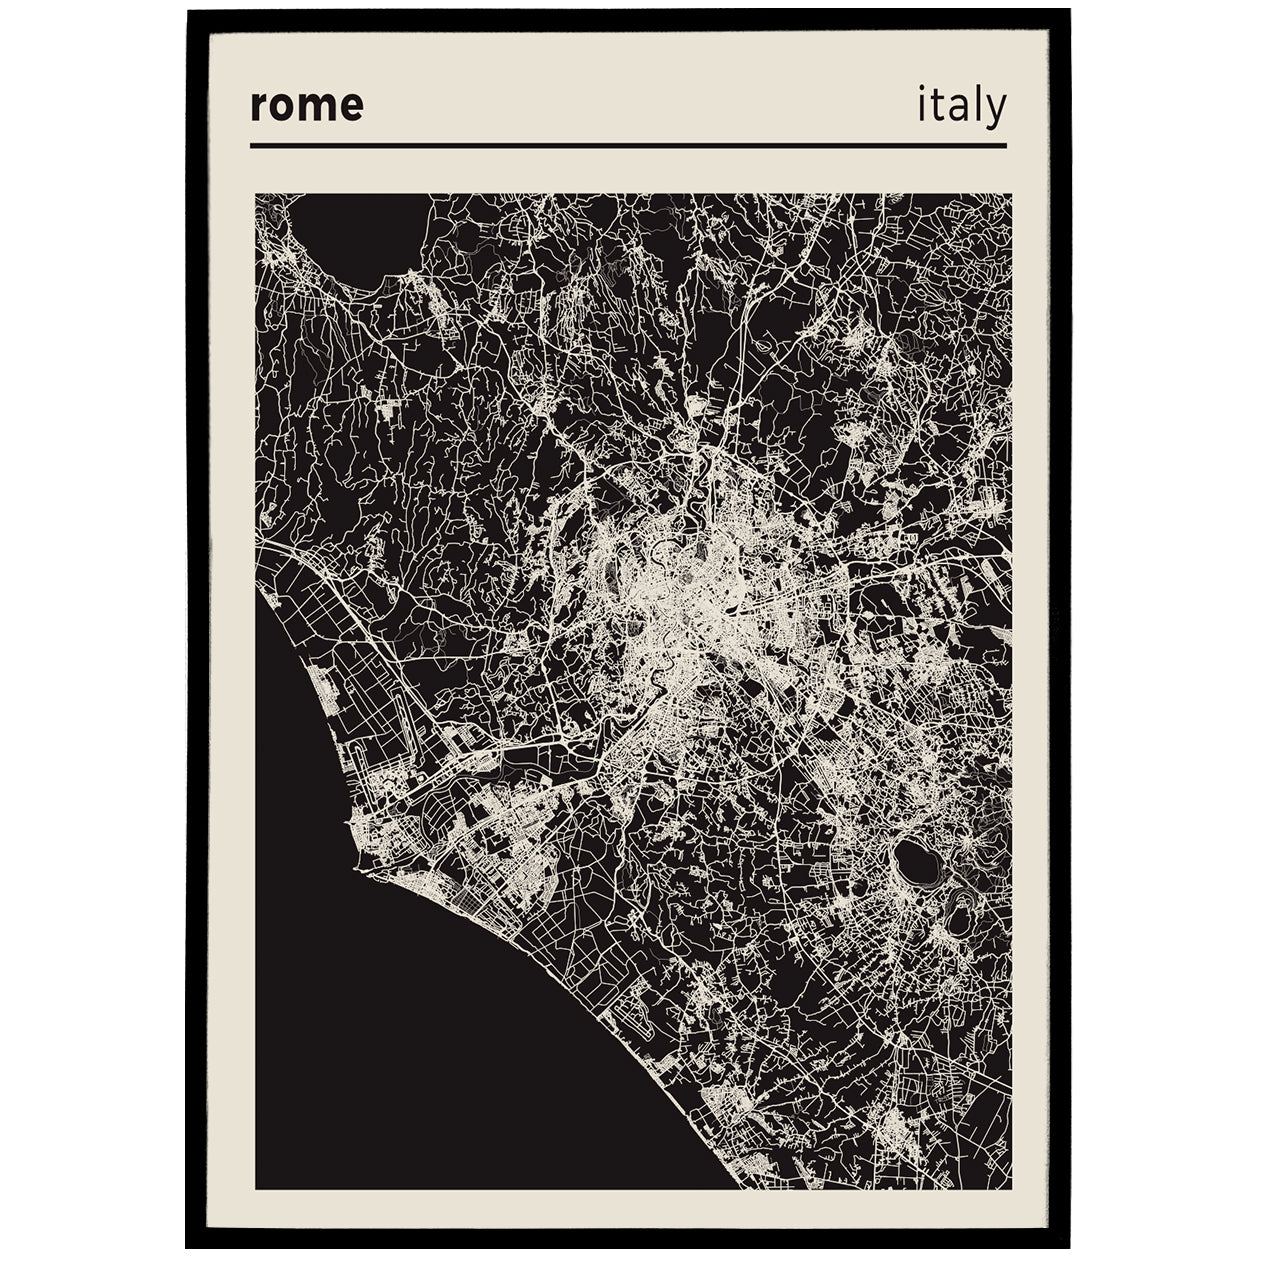 Rome City Map - Italy - Black and White Poster